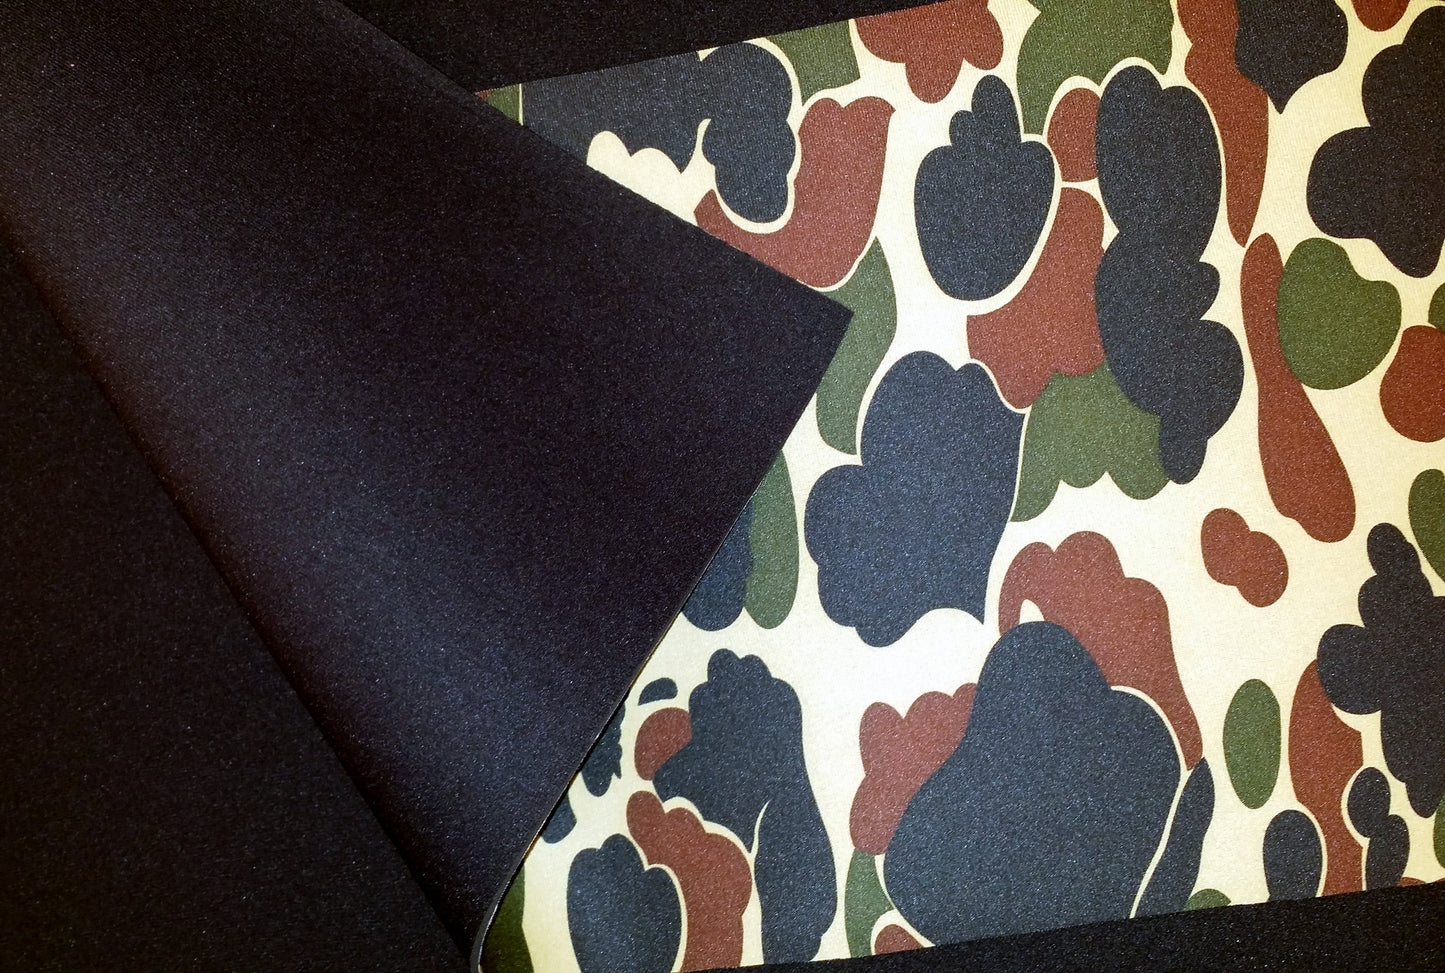 2mm Camouflage Neoprene Fabric Wetsuit Material For Sewing